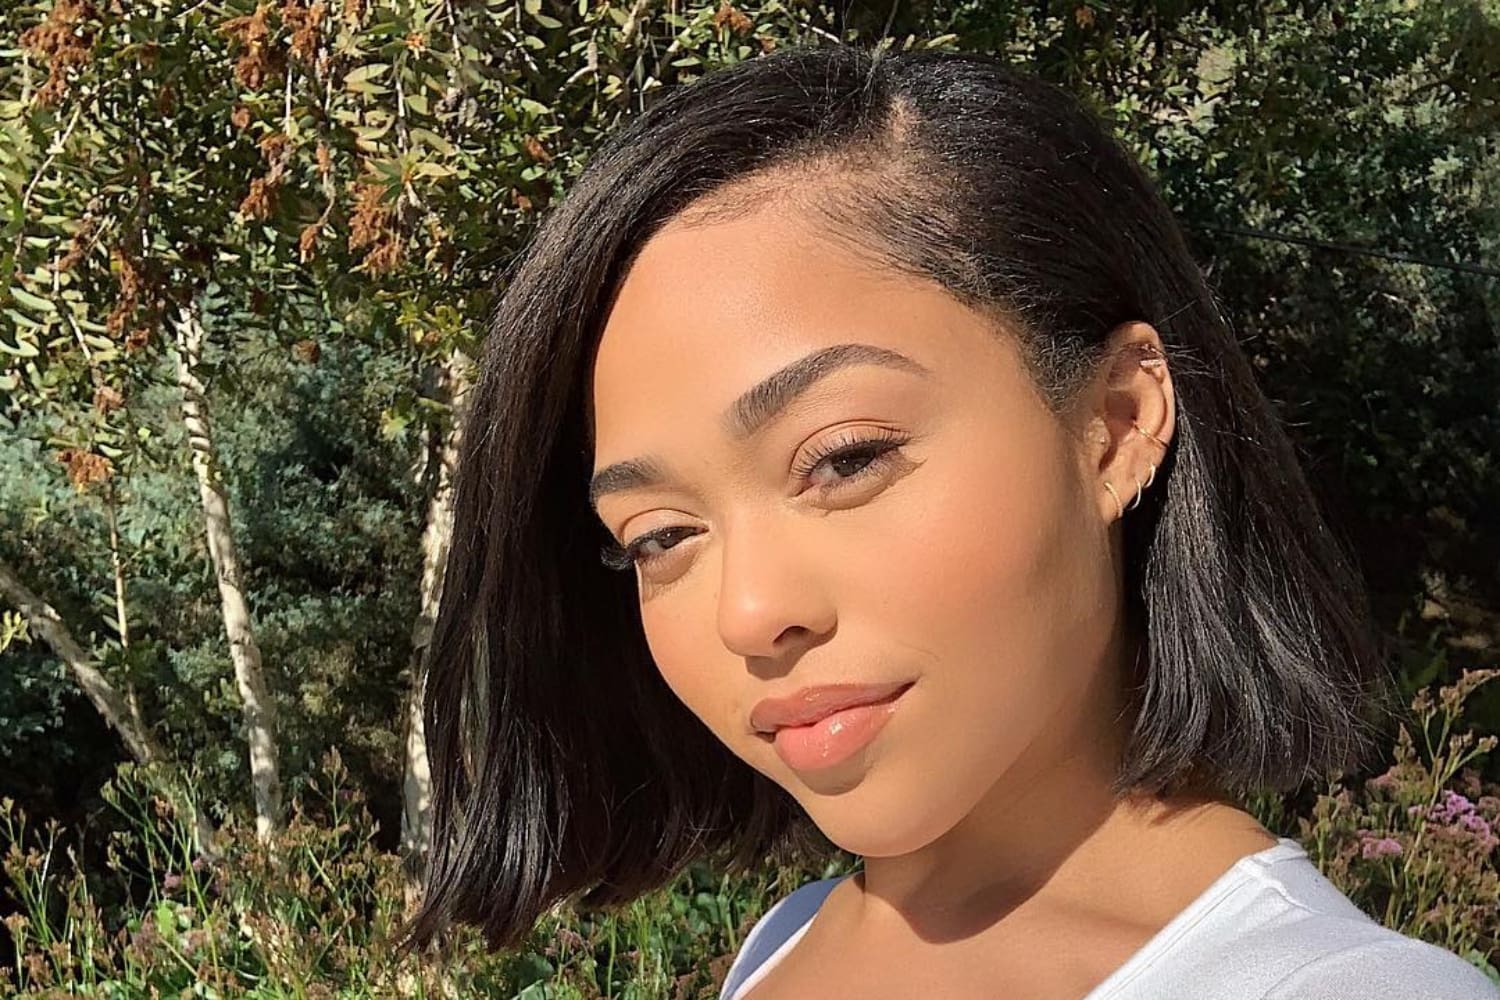 Jordyn Woods Drops Her Clothes And Shows Off Her Beach Body By The Pool - Check Out The Juicy Pics That Have Fans Praising Her Natural Curves